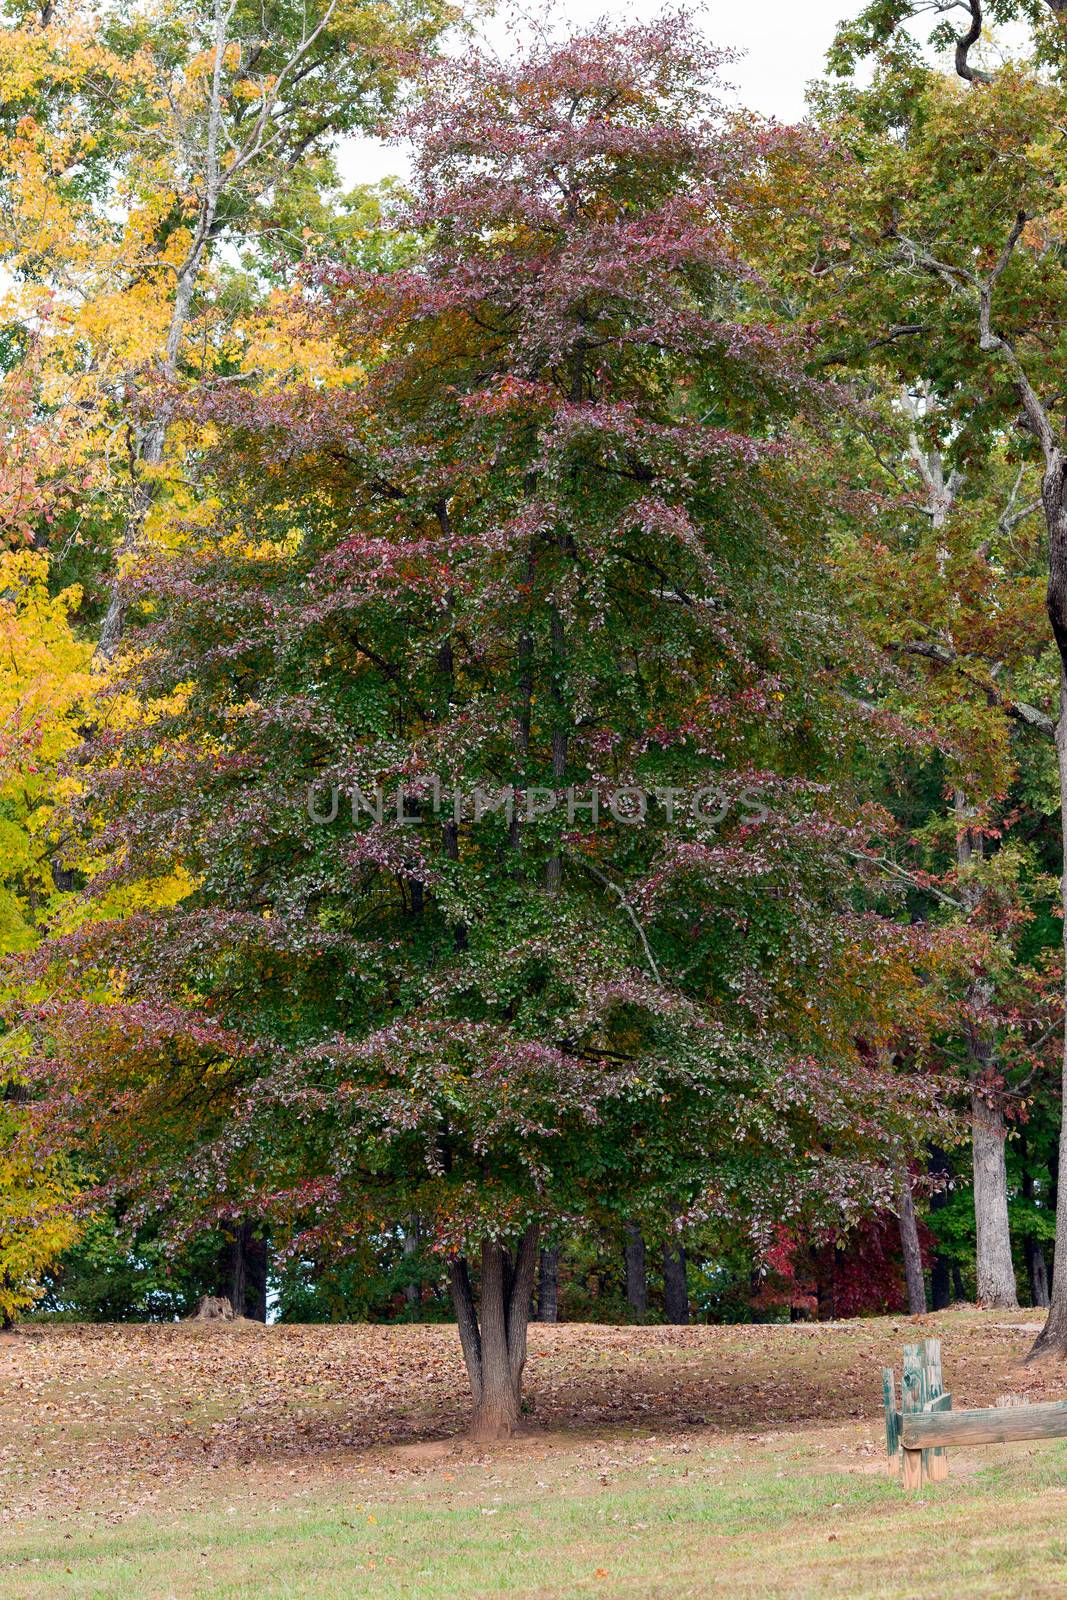 This tree is changing colors at Chatuge Park Reservoir in North Carolina.